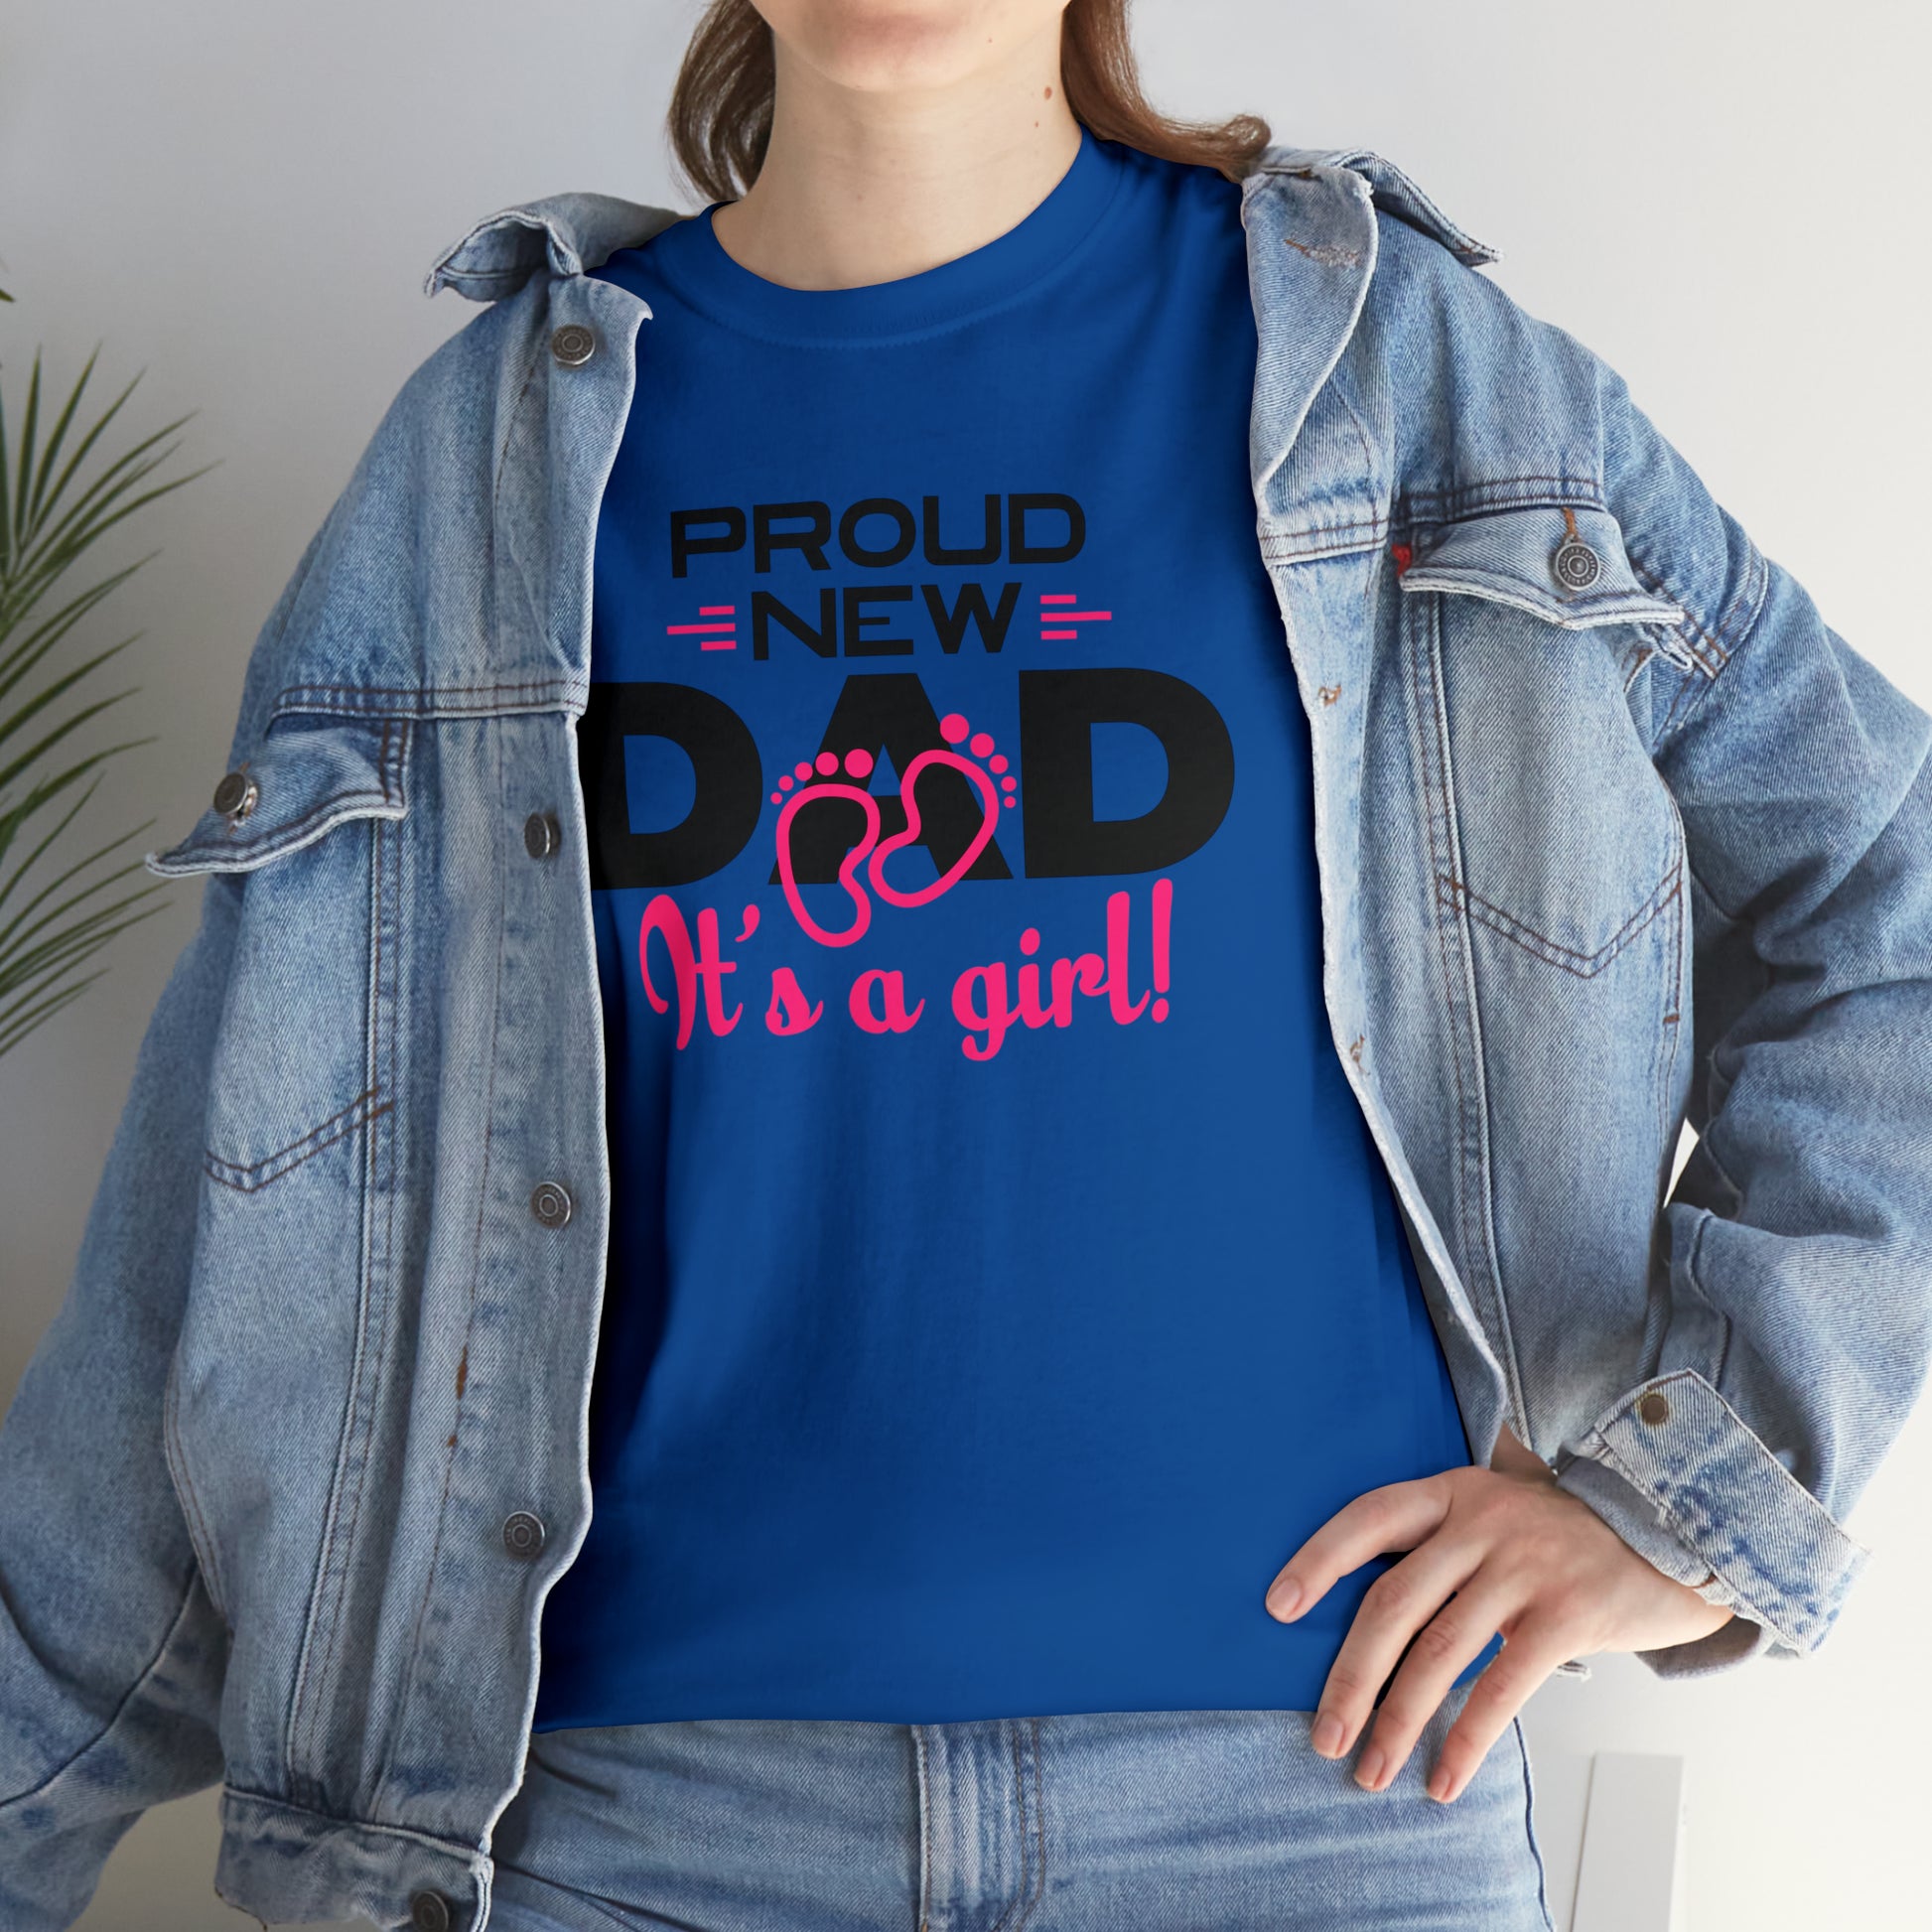 "Proud New Girl Dad" T-Shirt - Weave Got Gifts - Unique Gifts You Won’t Find Anywhere Else!